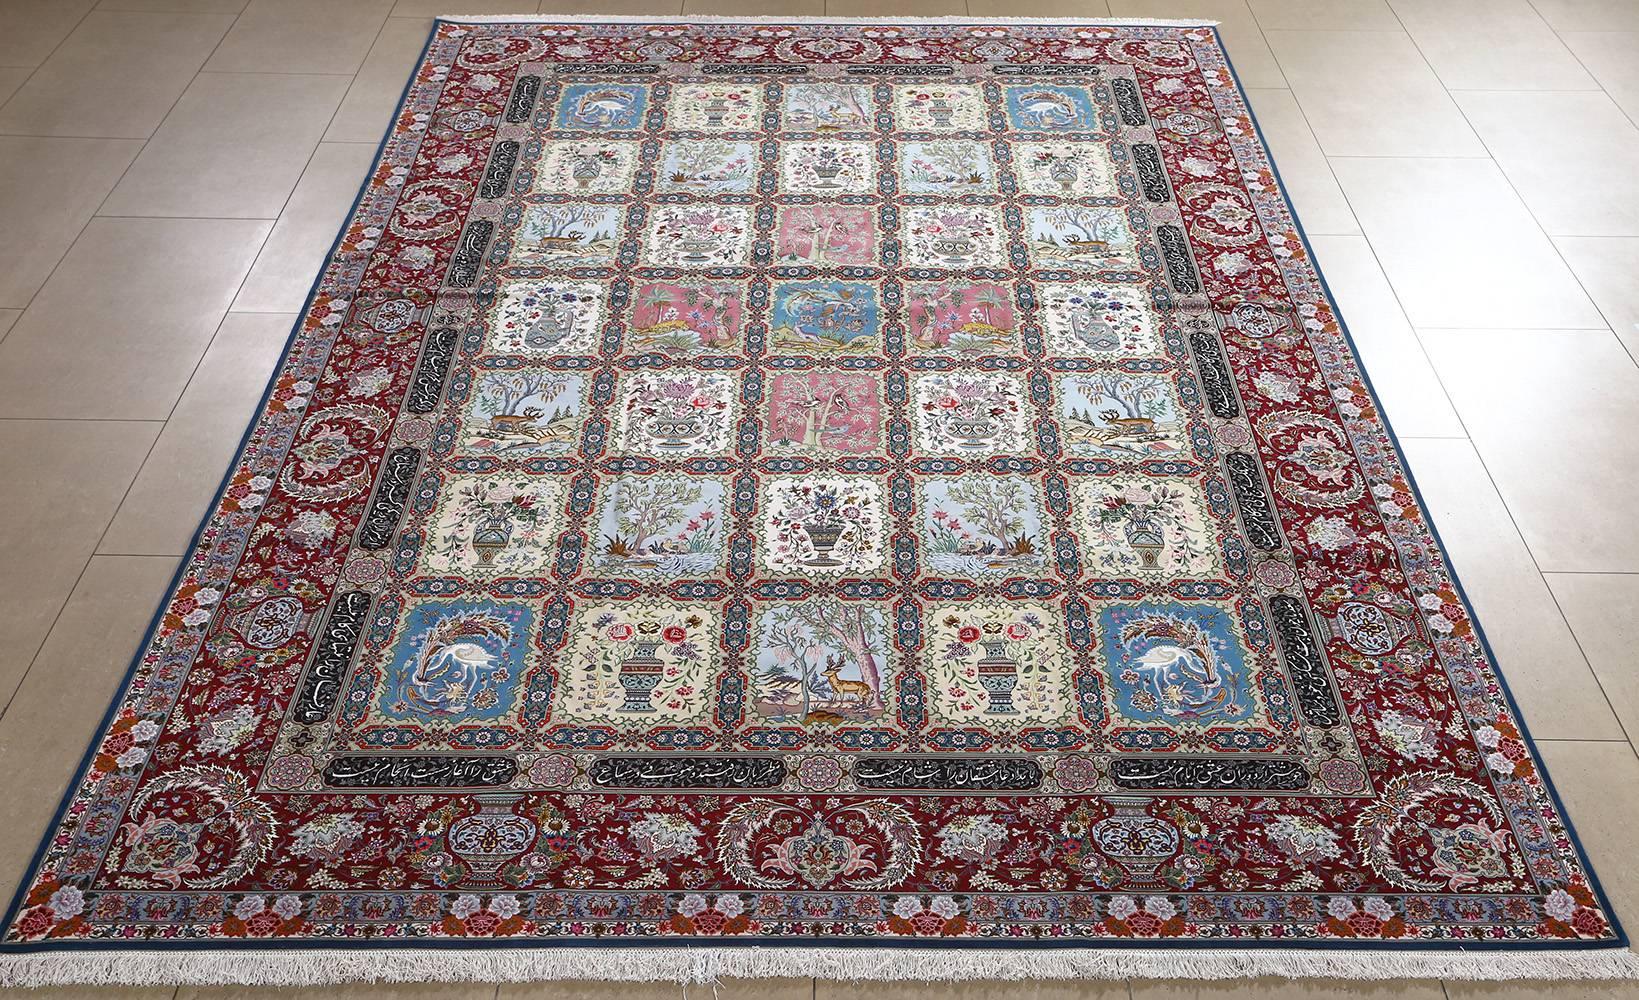 20th Century Nazmiyal Collection Vintage Tabriz Persian Rug. Size: 10 ft 7 in x 15 ft 11 in